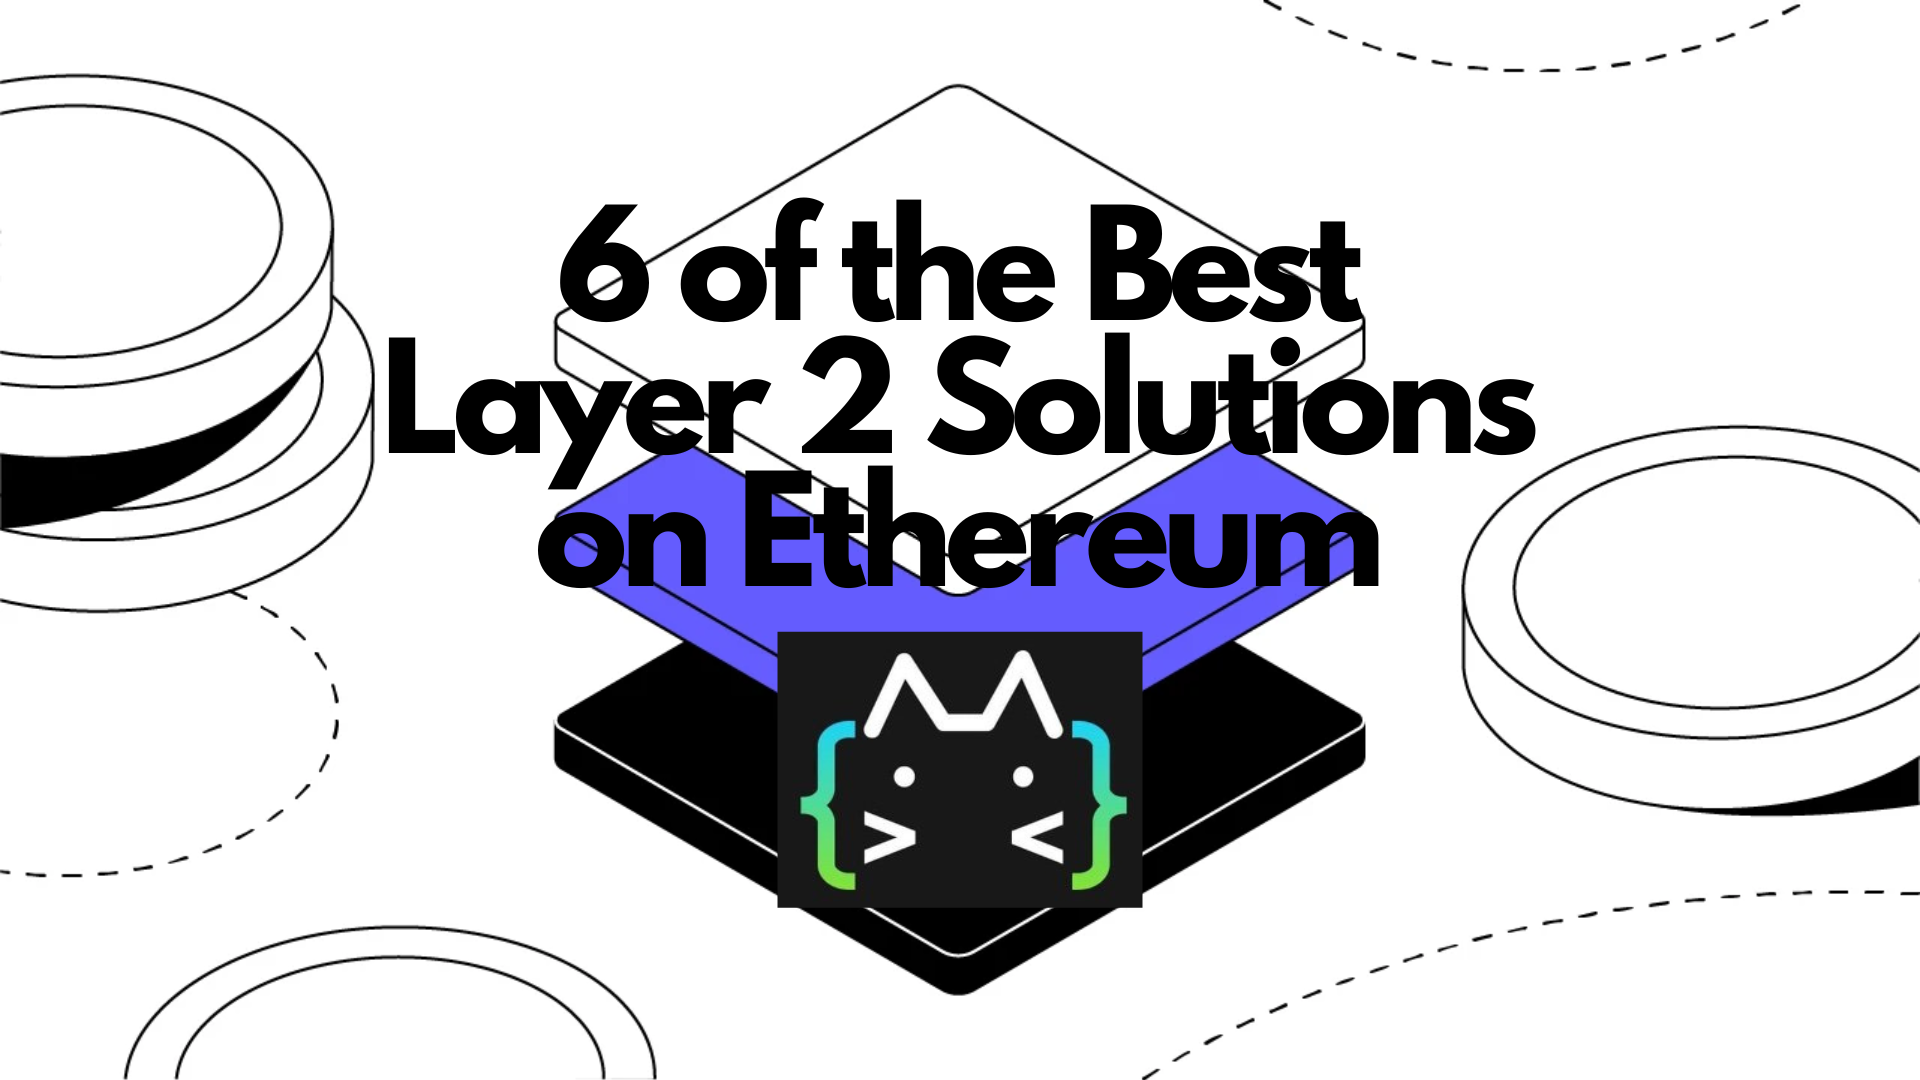 6 of the Best Layer 2 Solutions on Ethereum